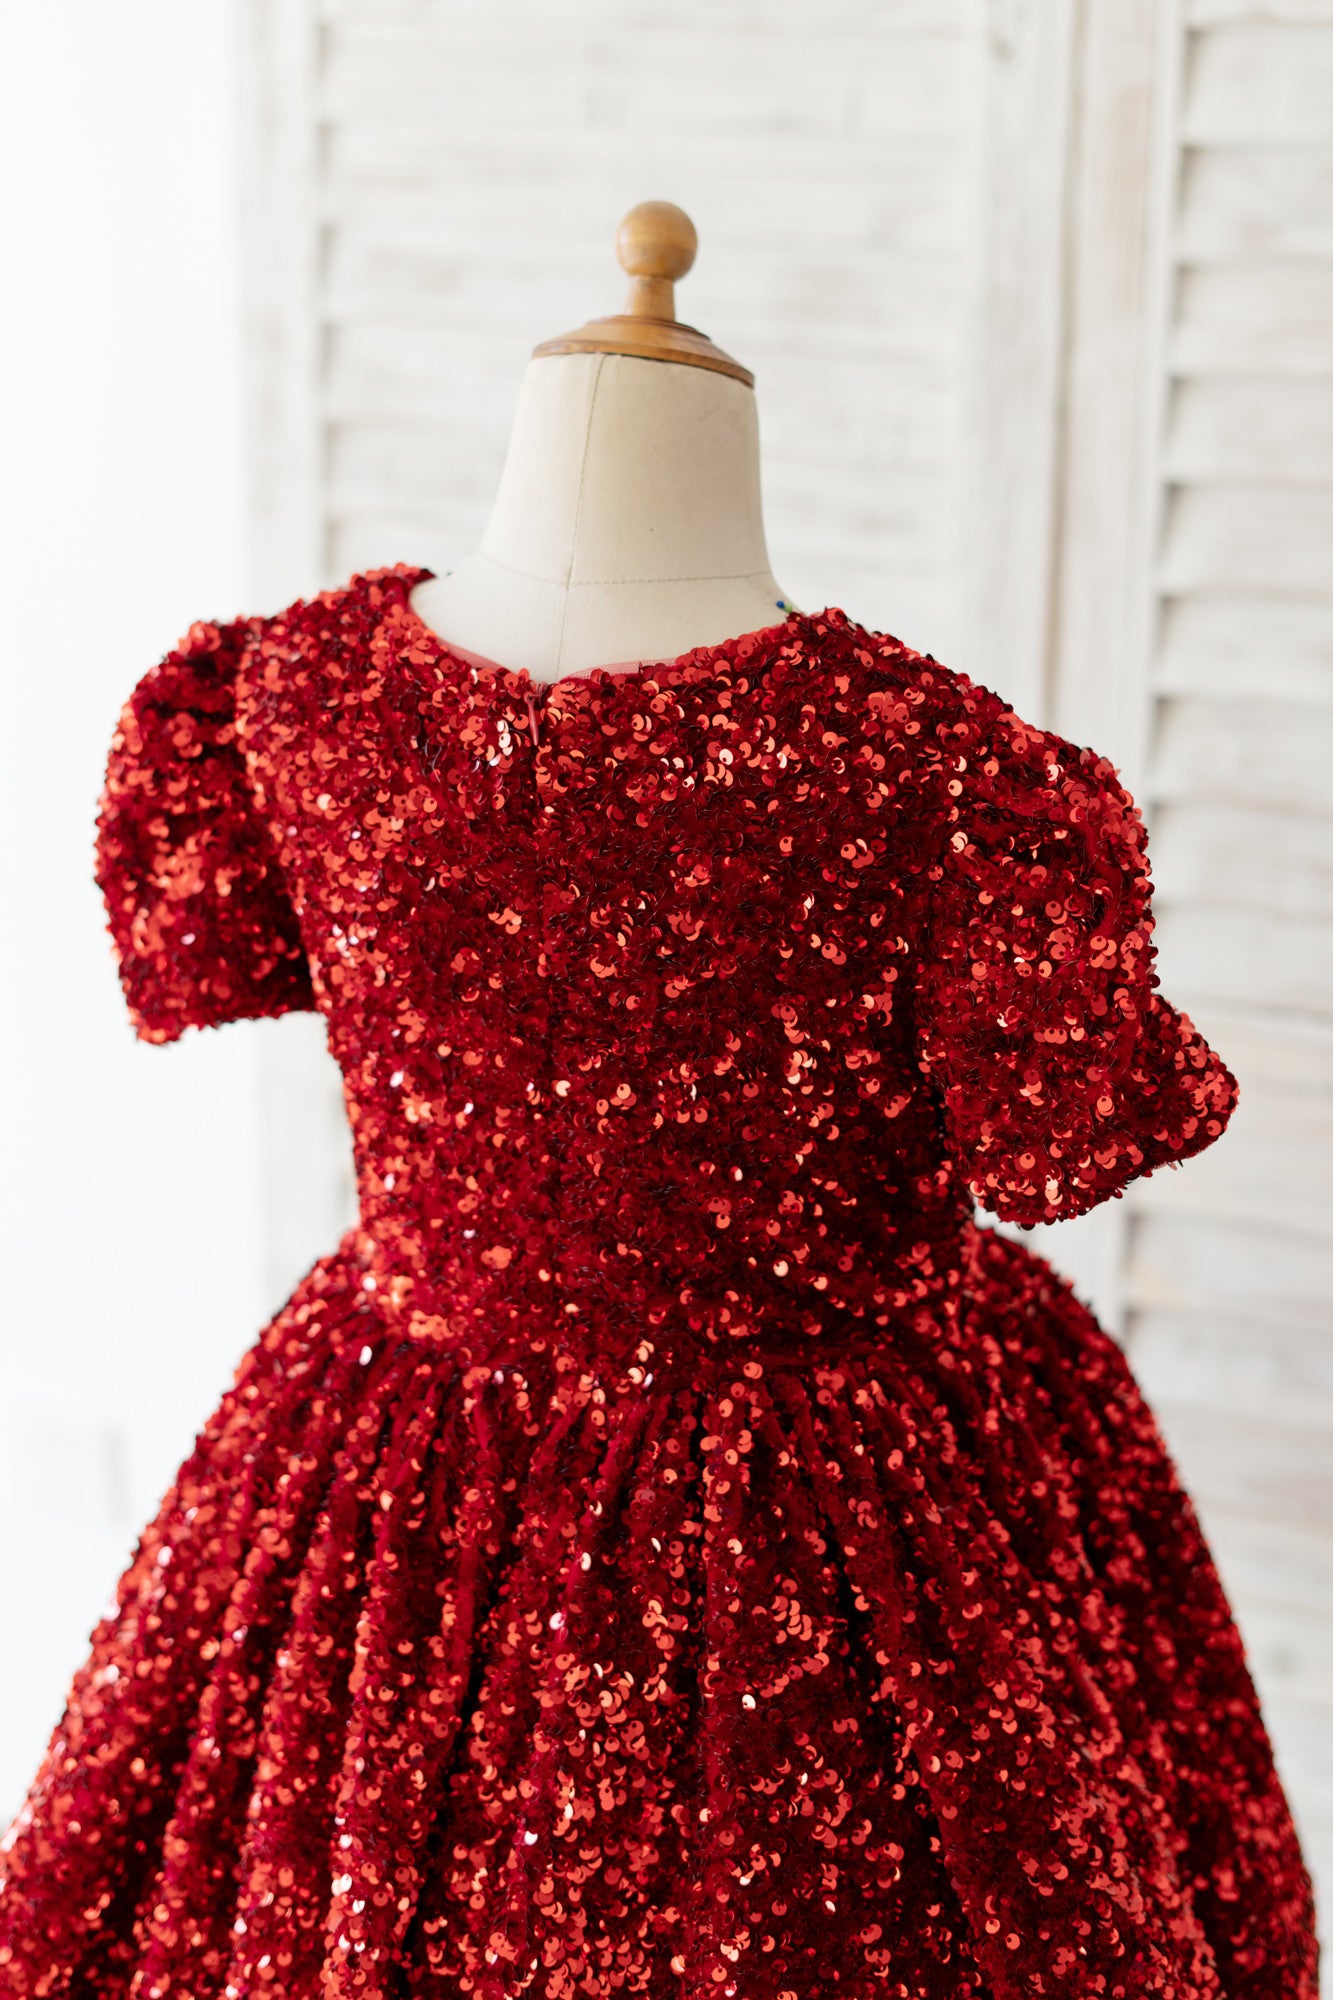 The grand formal dress to make little girls appear dazzling and  sophisticated